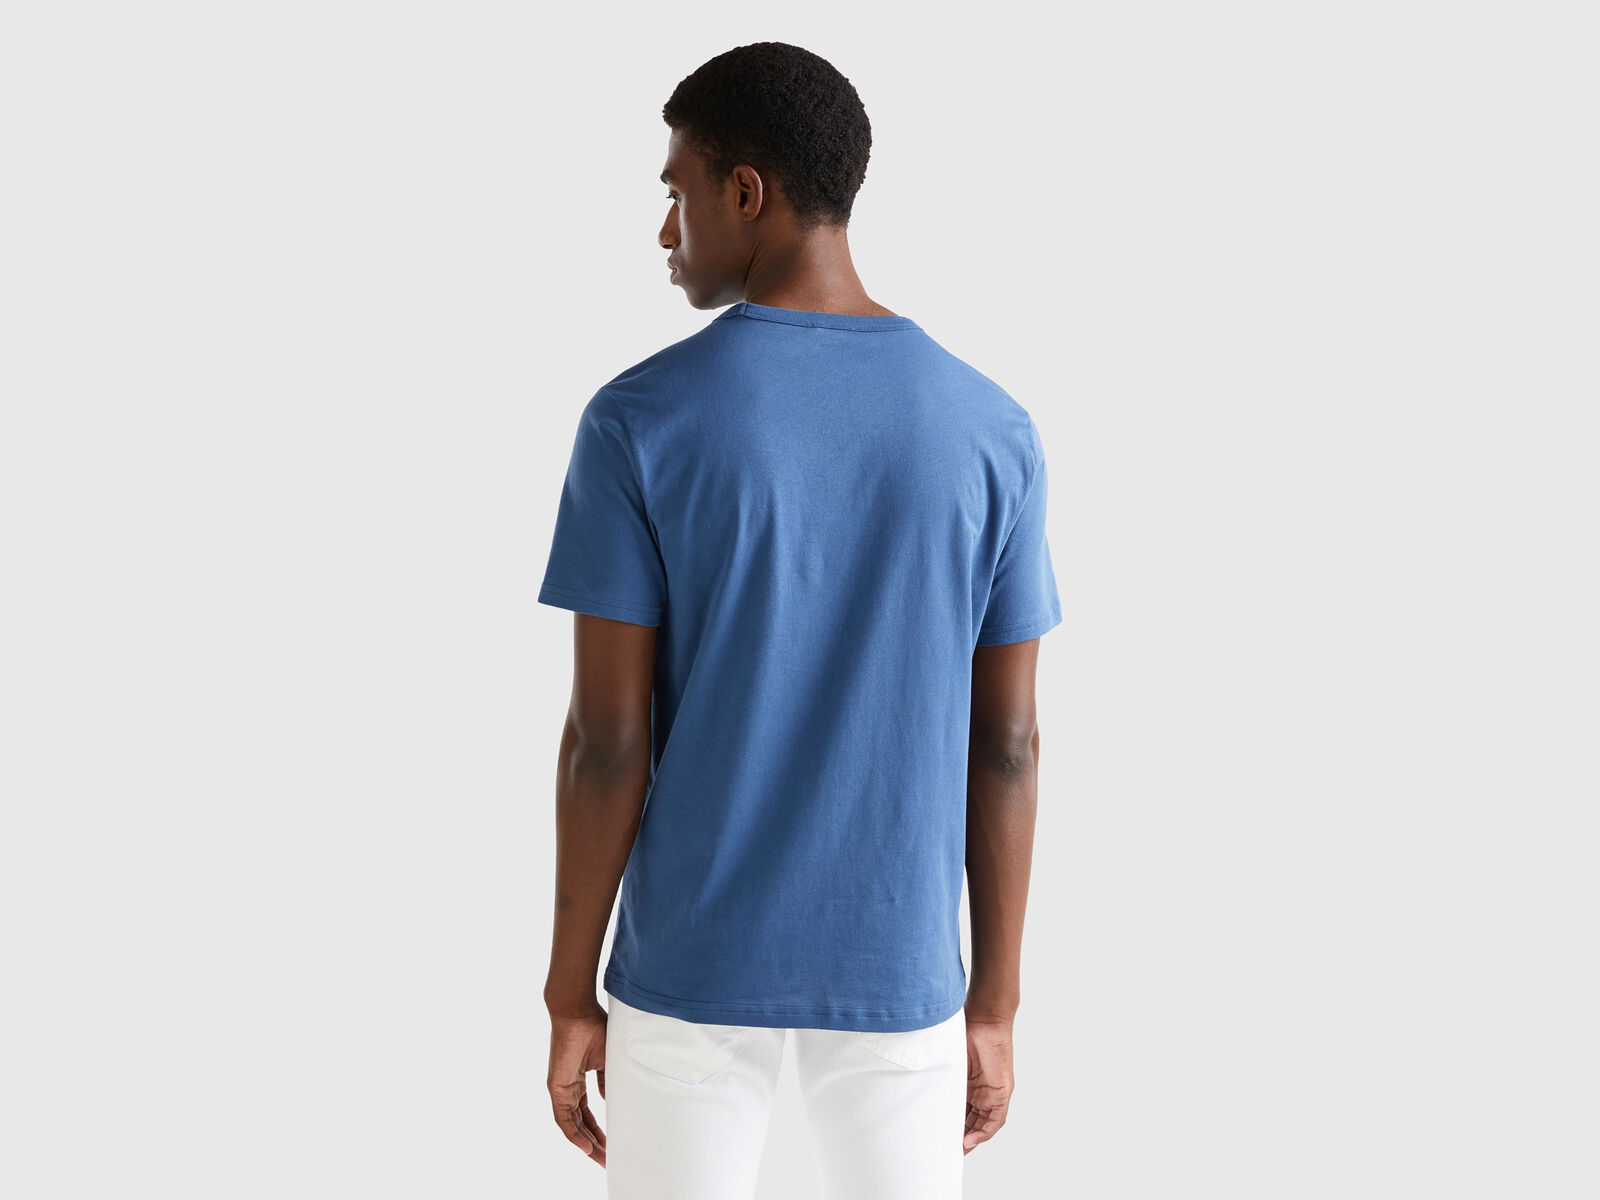 Force print - t-shirt organic Air logo cotton in force | Blue Air blue Benetton with